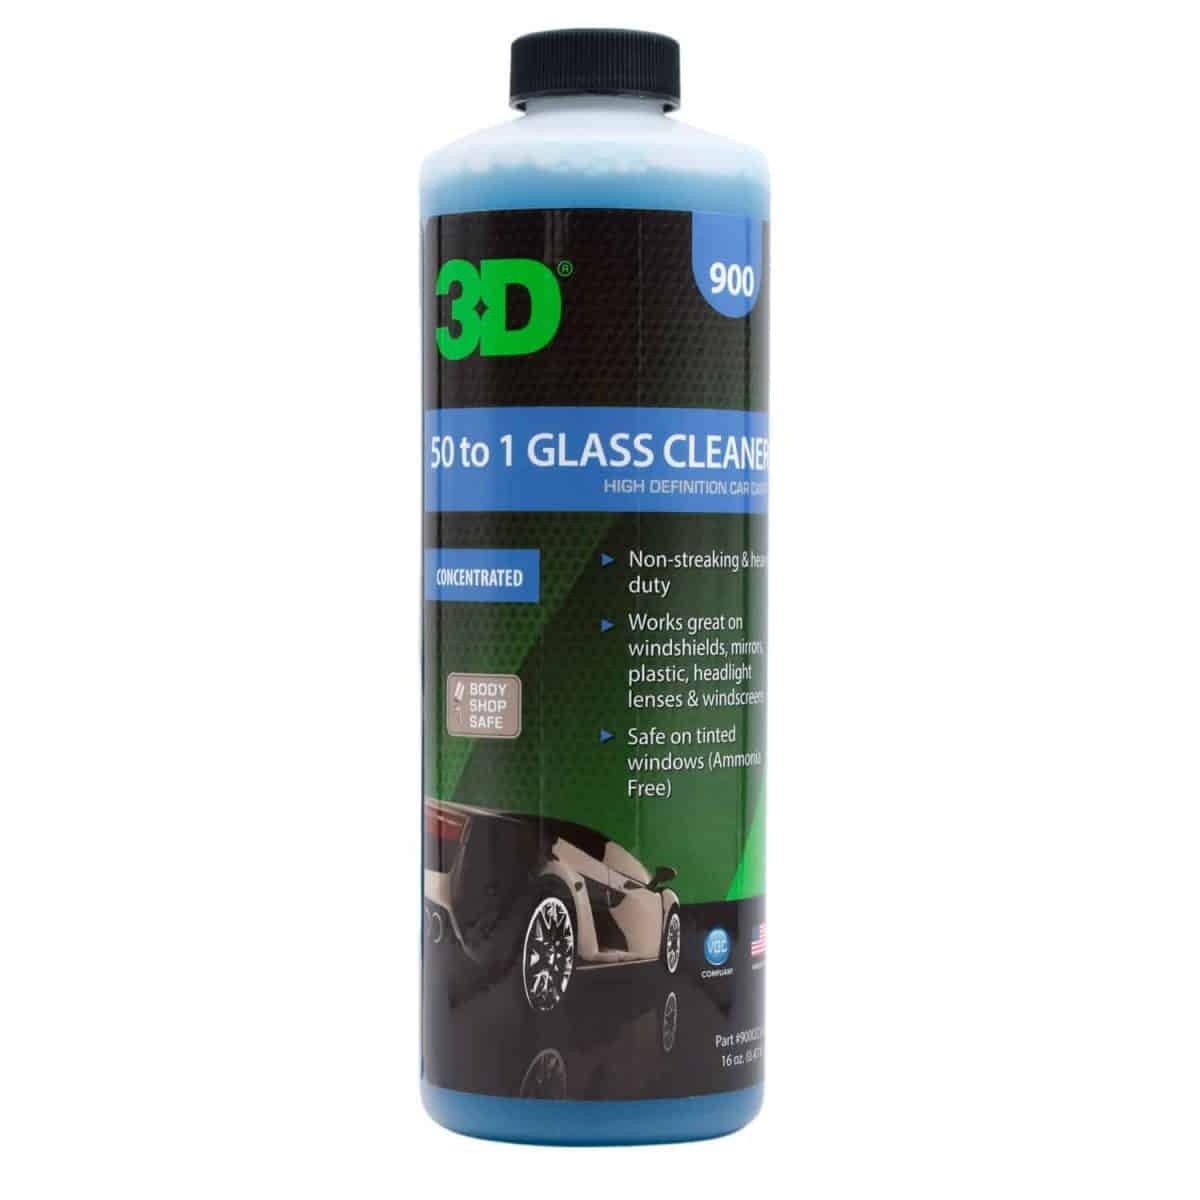 50 to 1 glass cleaner